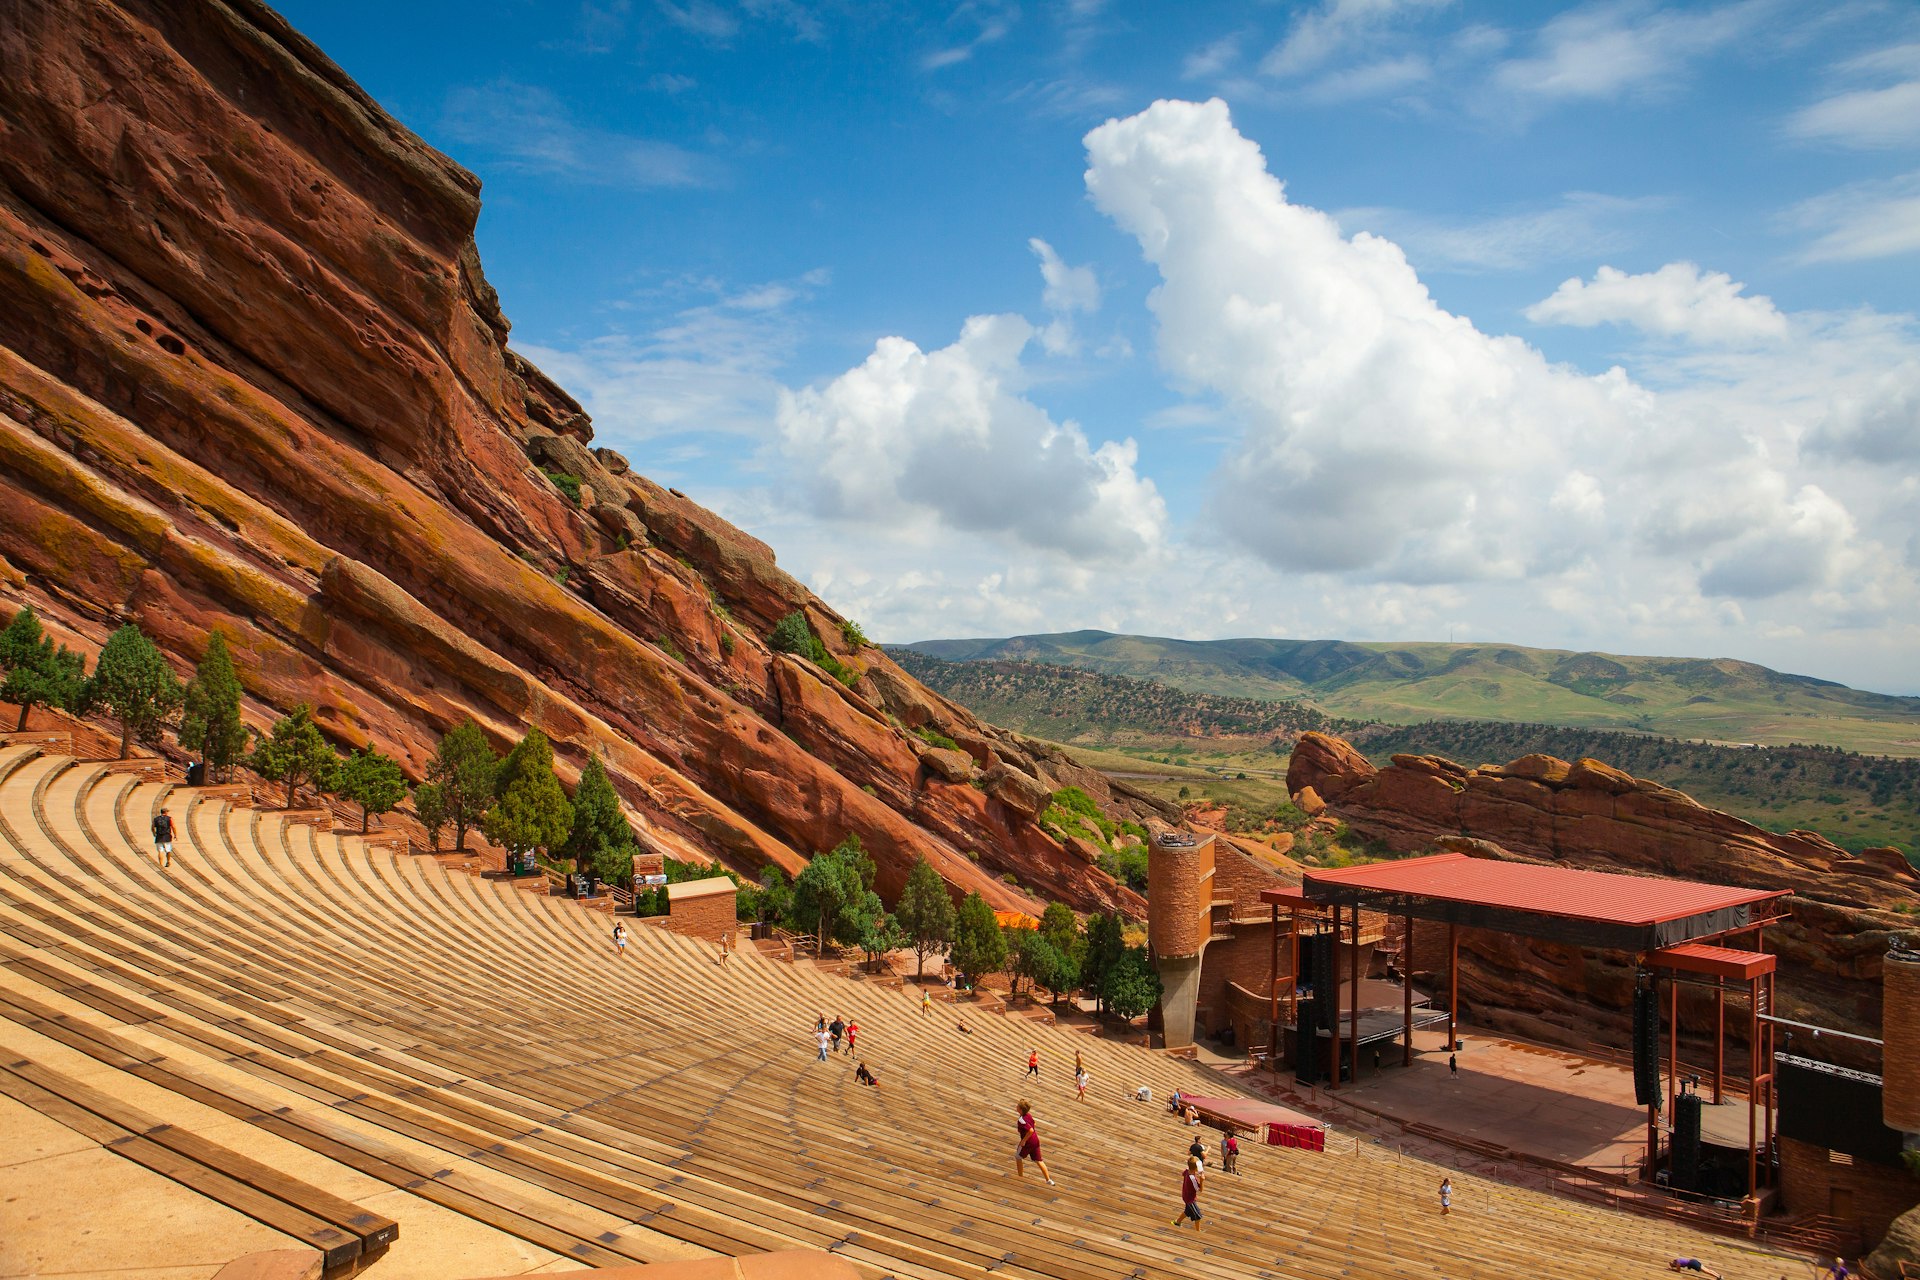 Looking down toward the stage at Red Rocks Amphitheatre, Colorado